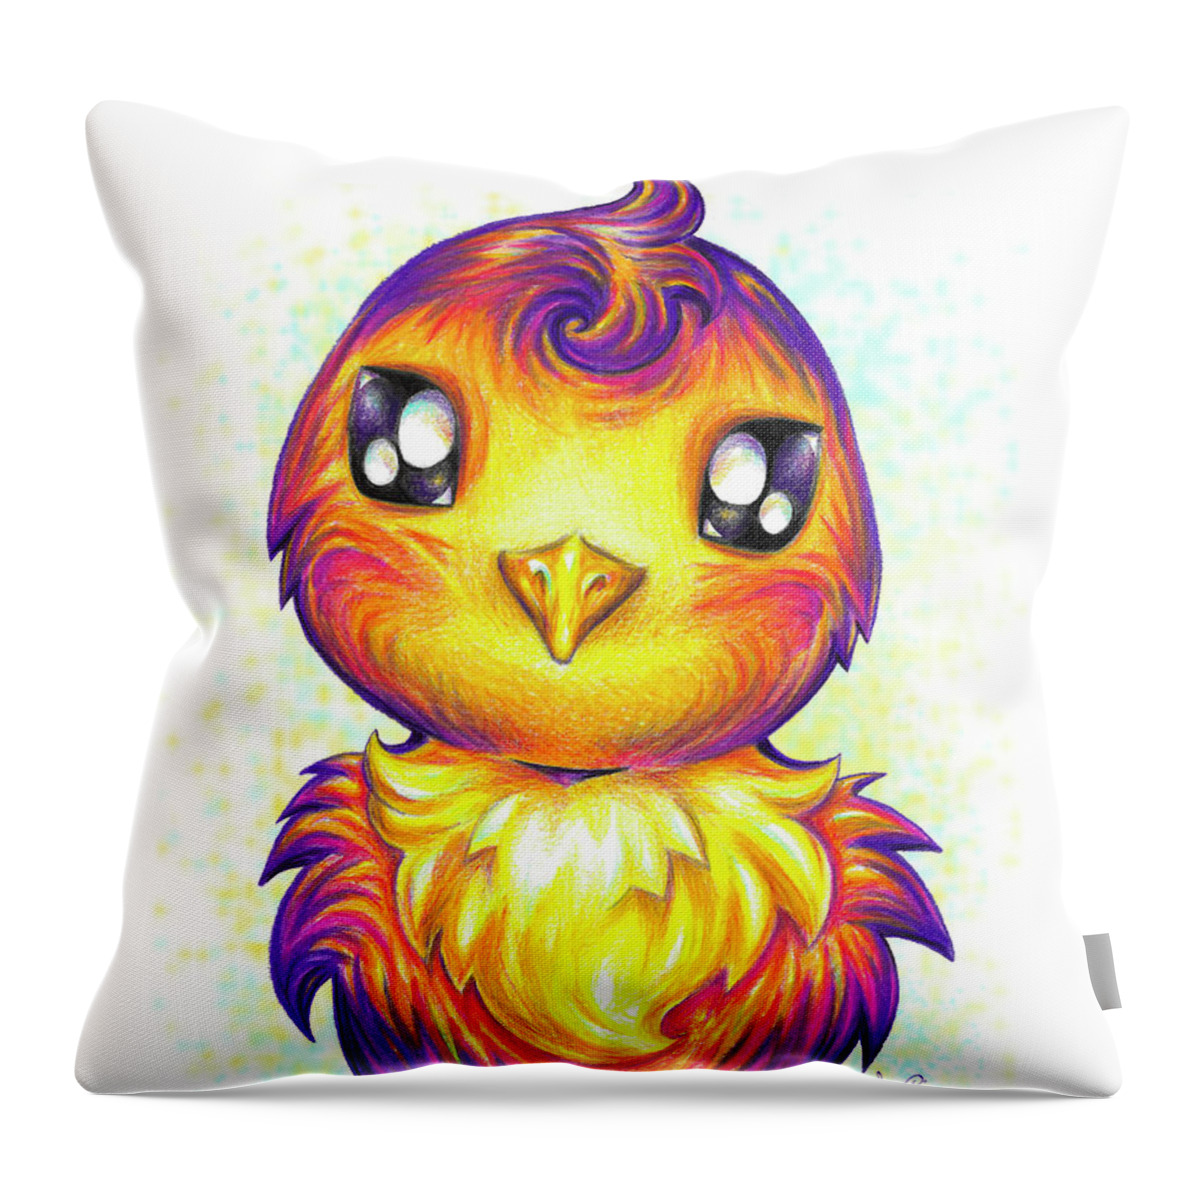 Nature Throw Pillow featuring the drawing Little Bird by Sipporah Art and Illustration